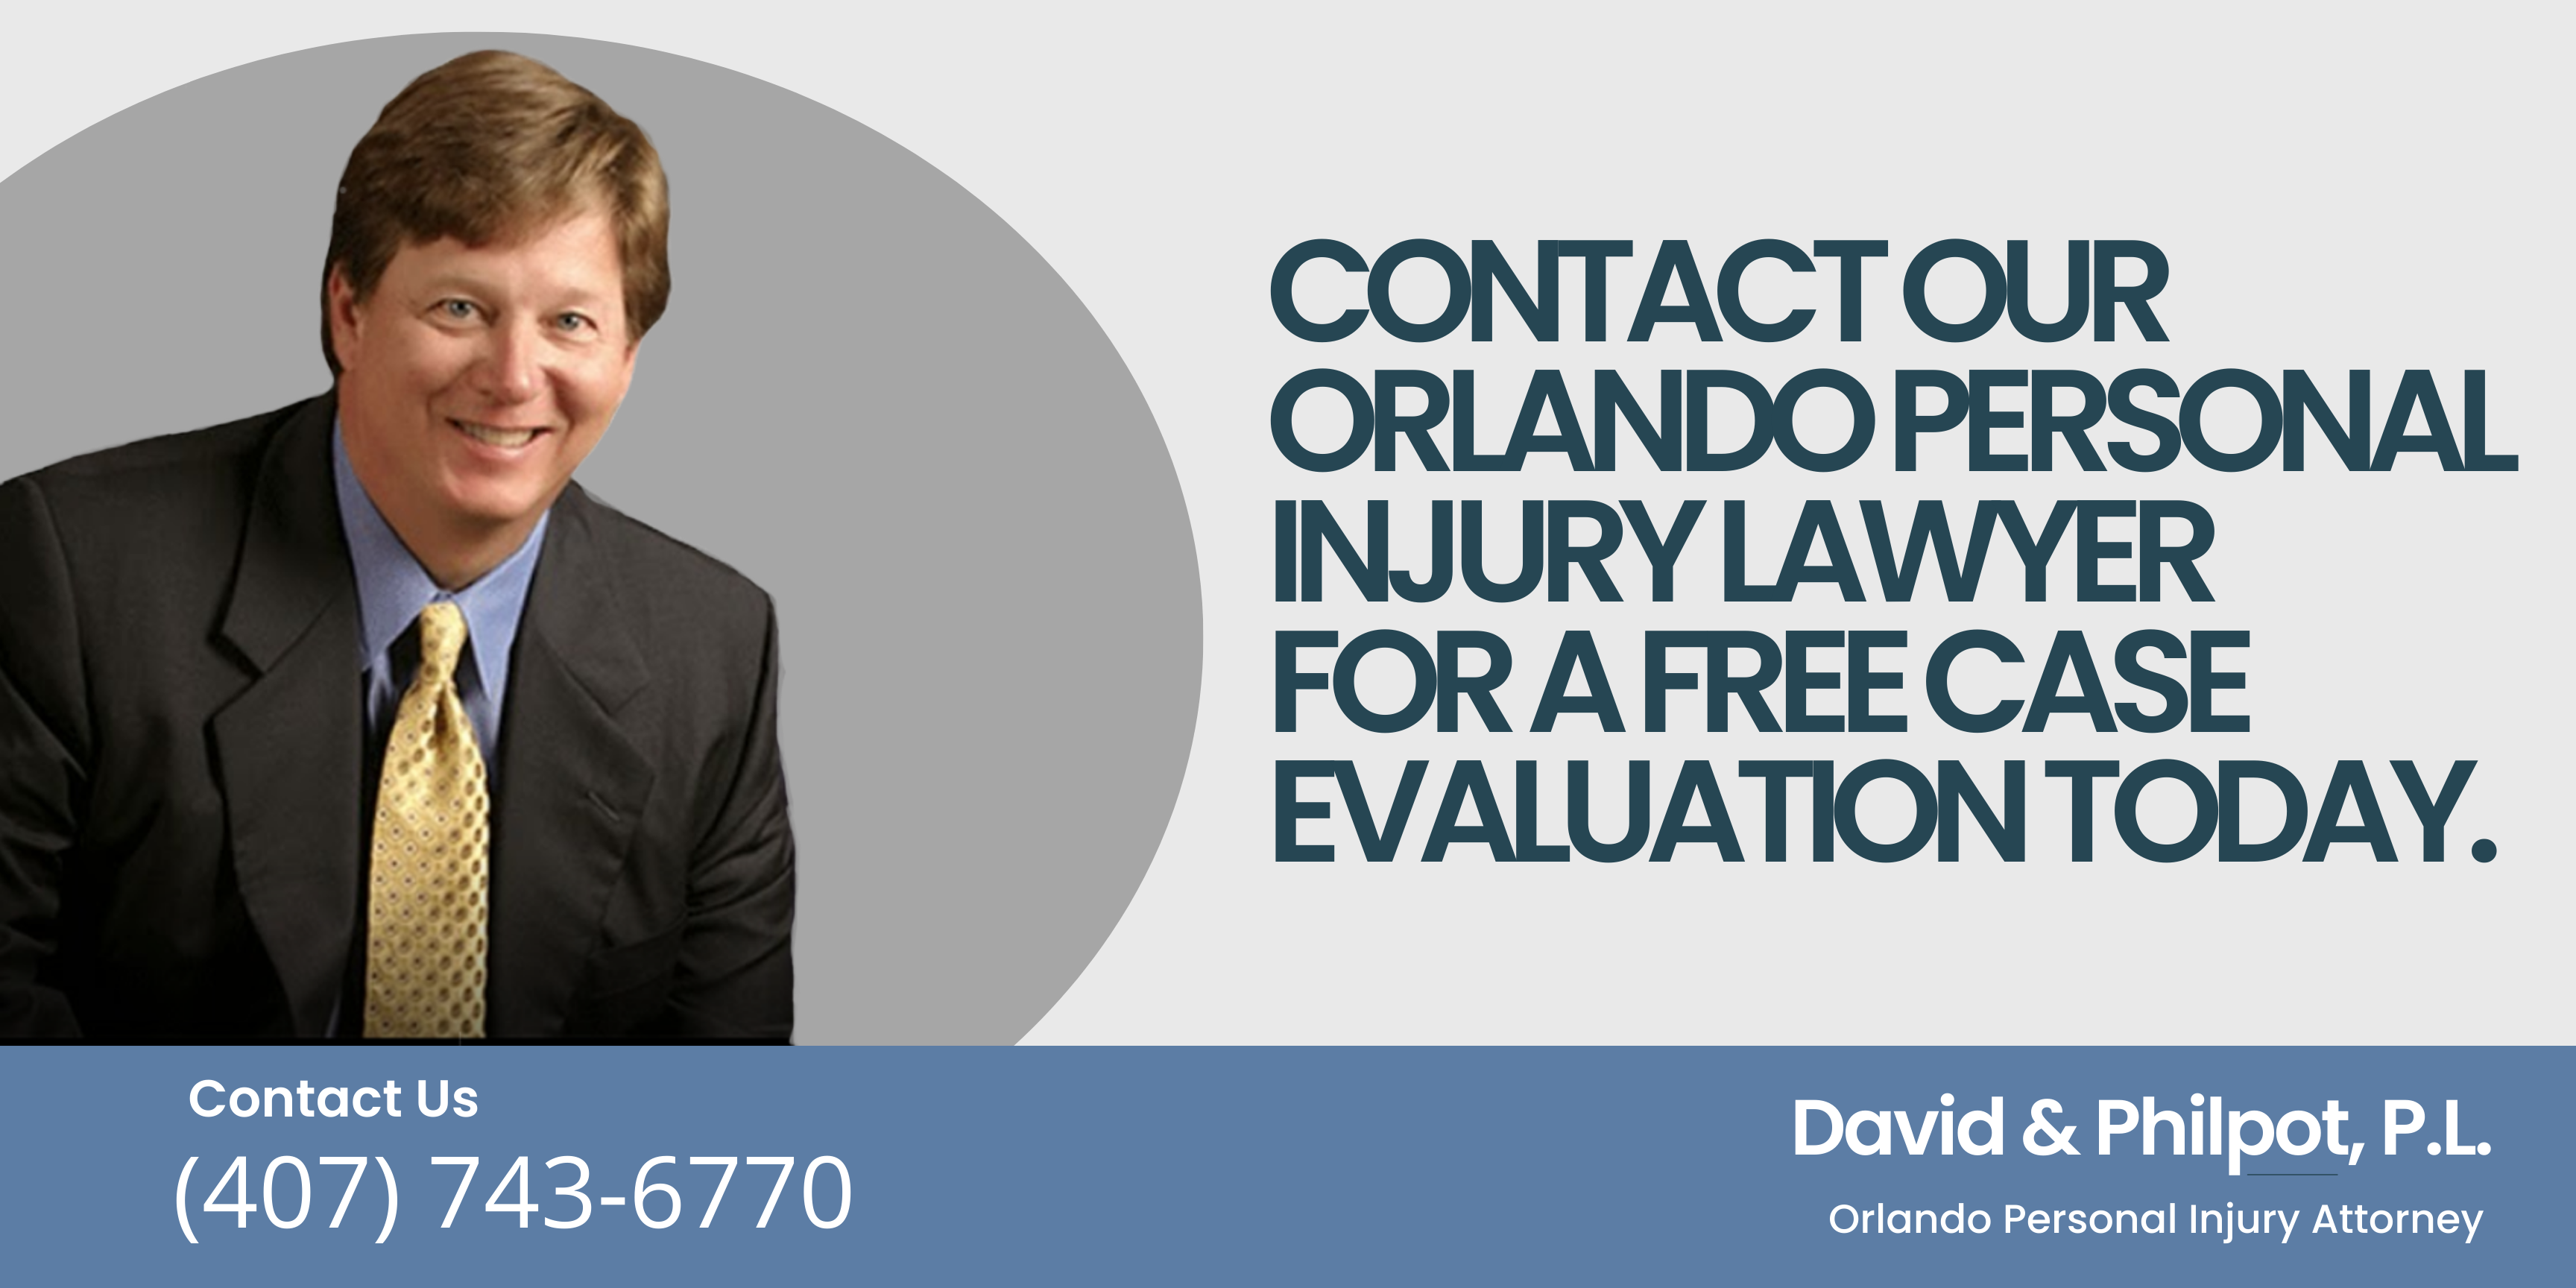 contact our Orlando Personal Injury Lawyer